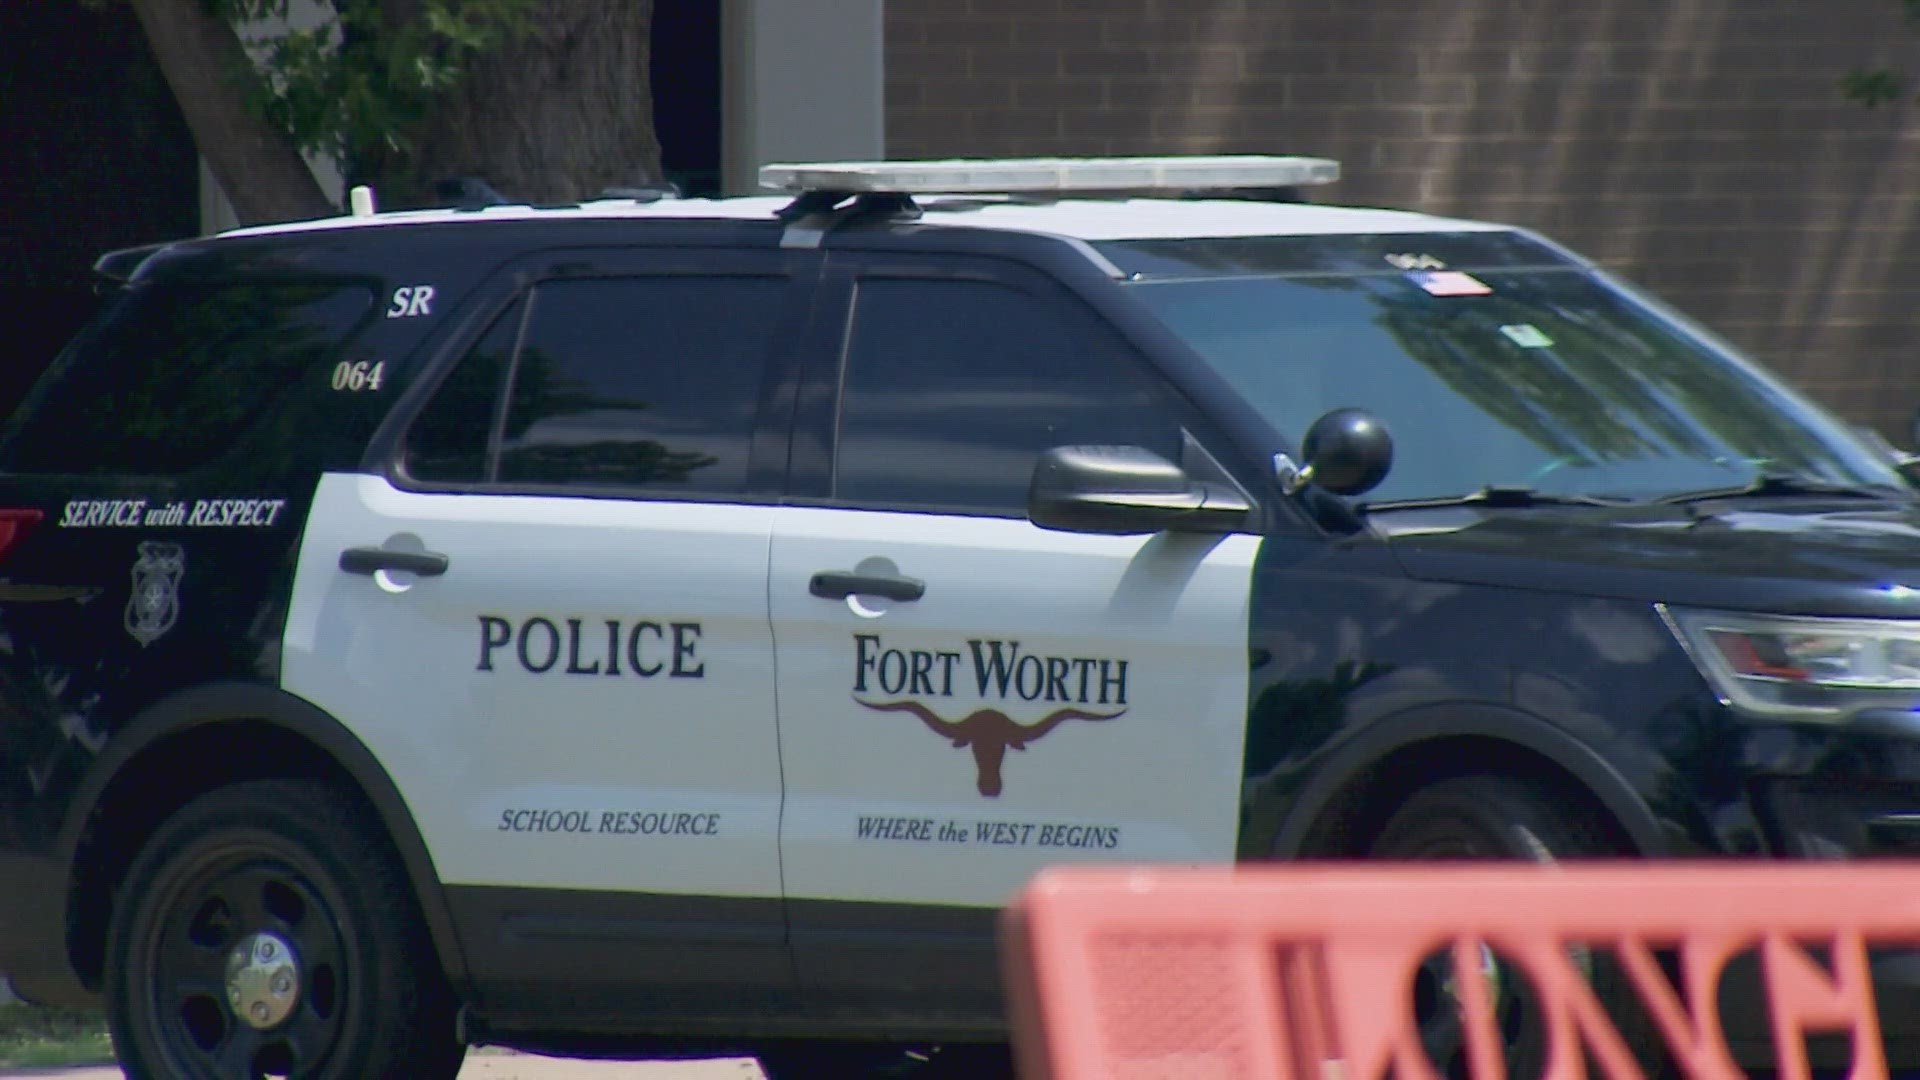 Fort Worth ISD confirmed the shooting involved students at Leonard Middle School.